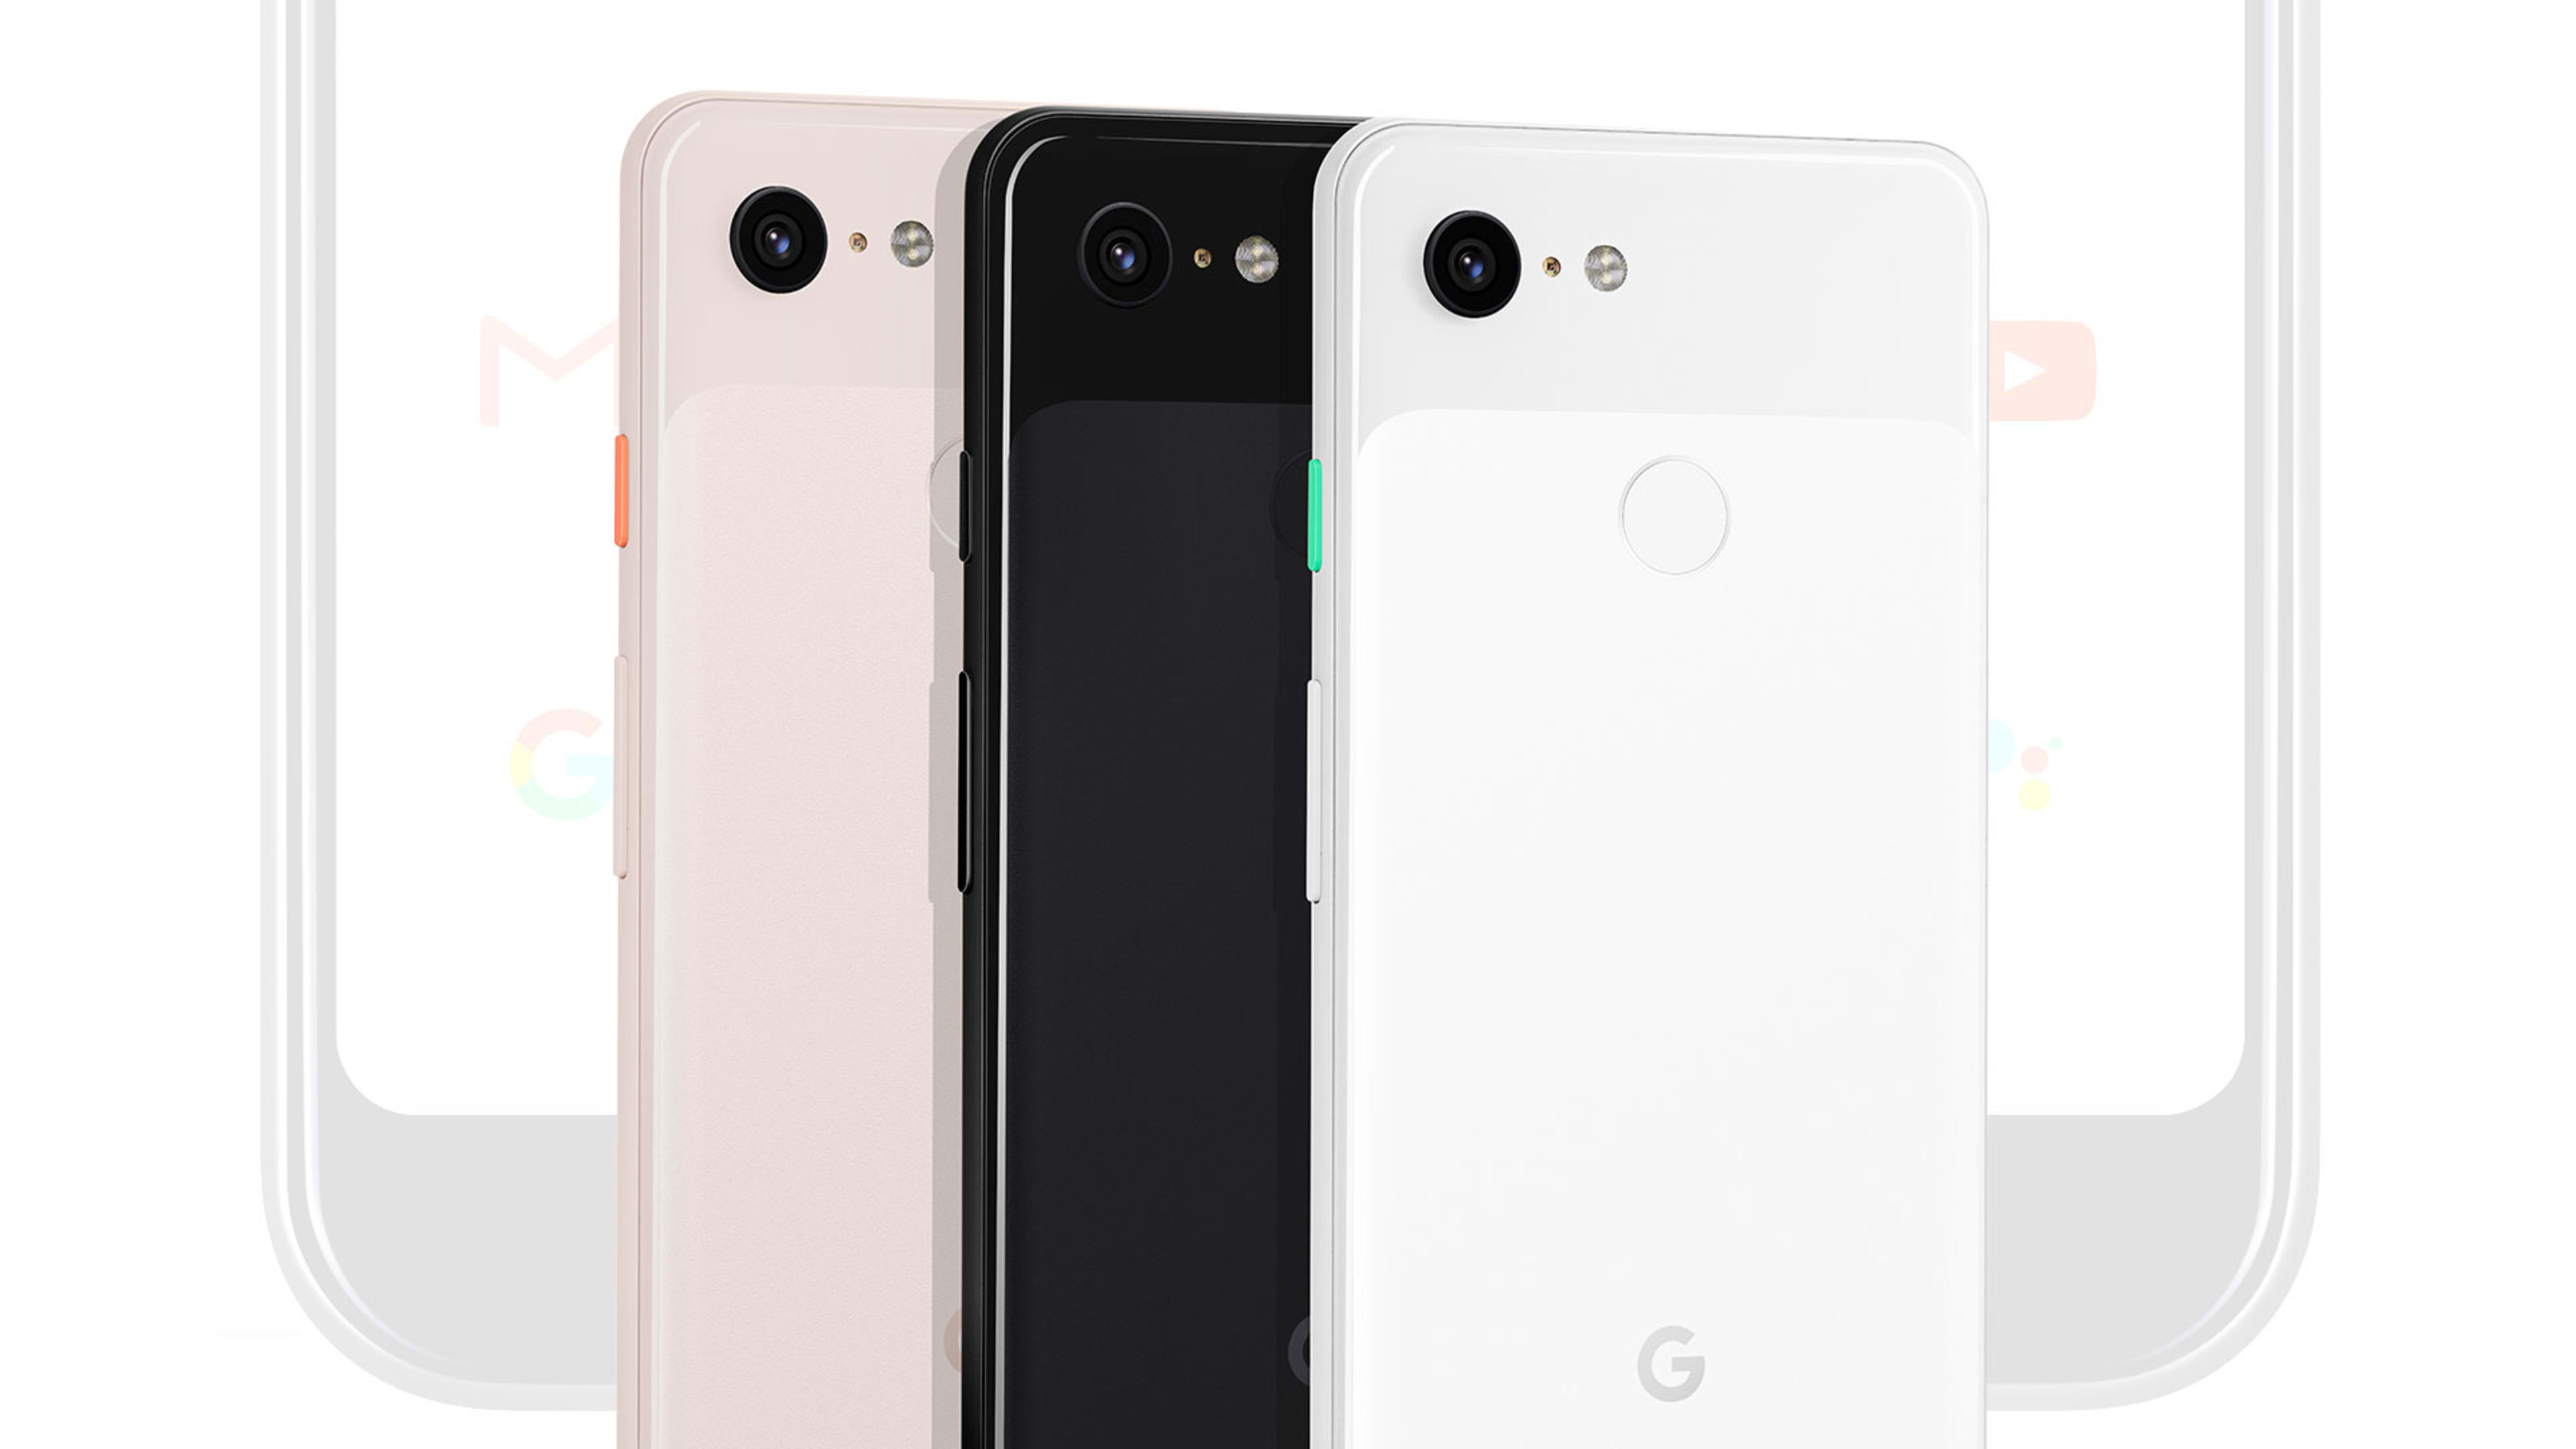 The case for Google’s Pixel 3, despite everything